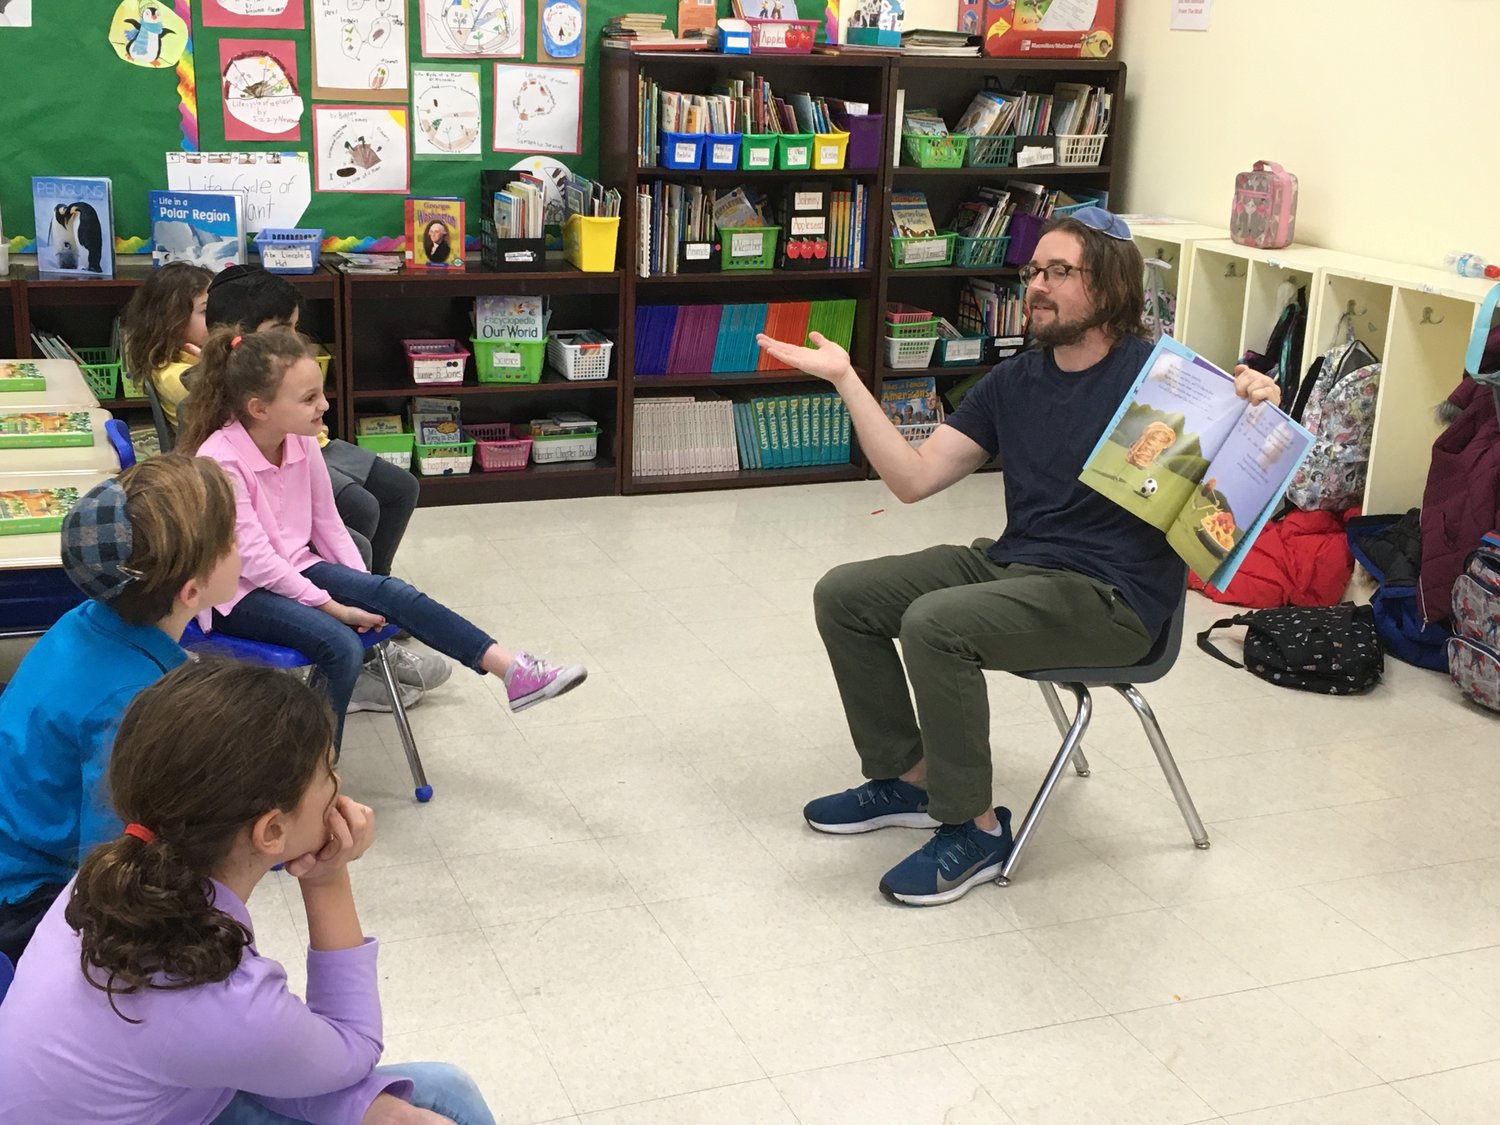 In an effort to bring World Read Aloud Day to school, Hindi’s Libraries co-founders Leslie Gang and Dovid Kanarfogel visited seven classrooms at The Brandeis School on Feb. 5. Kanarfogel read ‘Peanut Butter & Cupcake’ by Terry Border to Helen Liebman’s second-grade class.